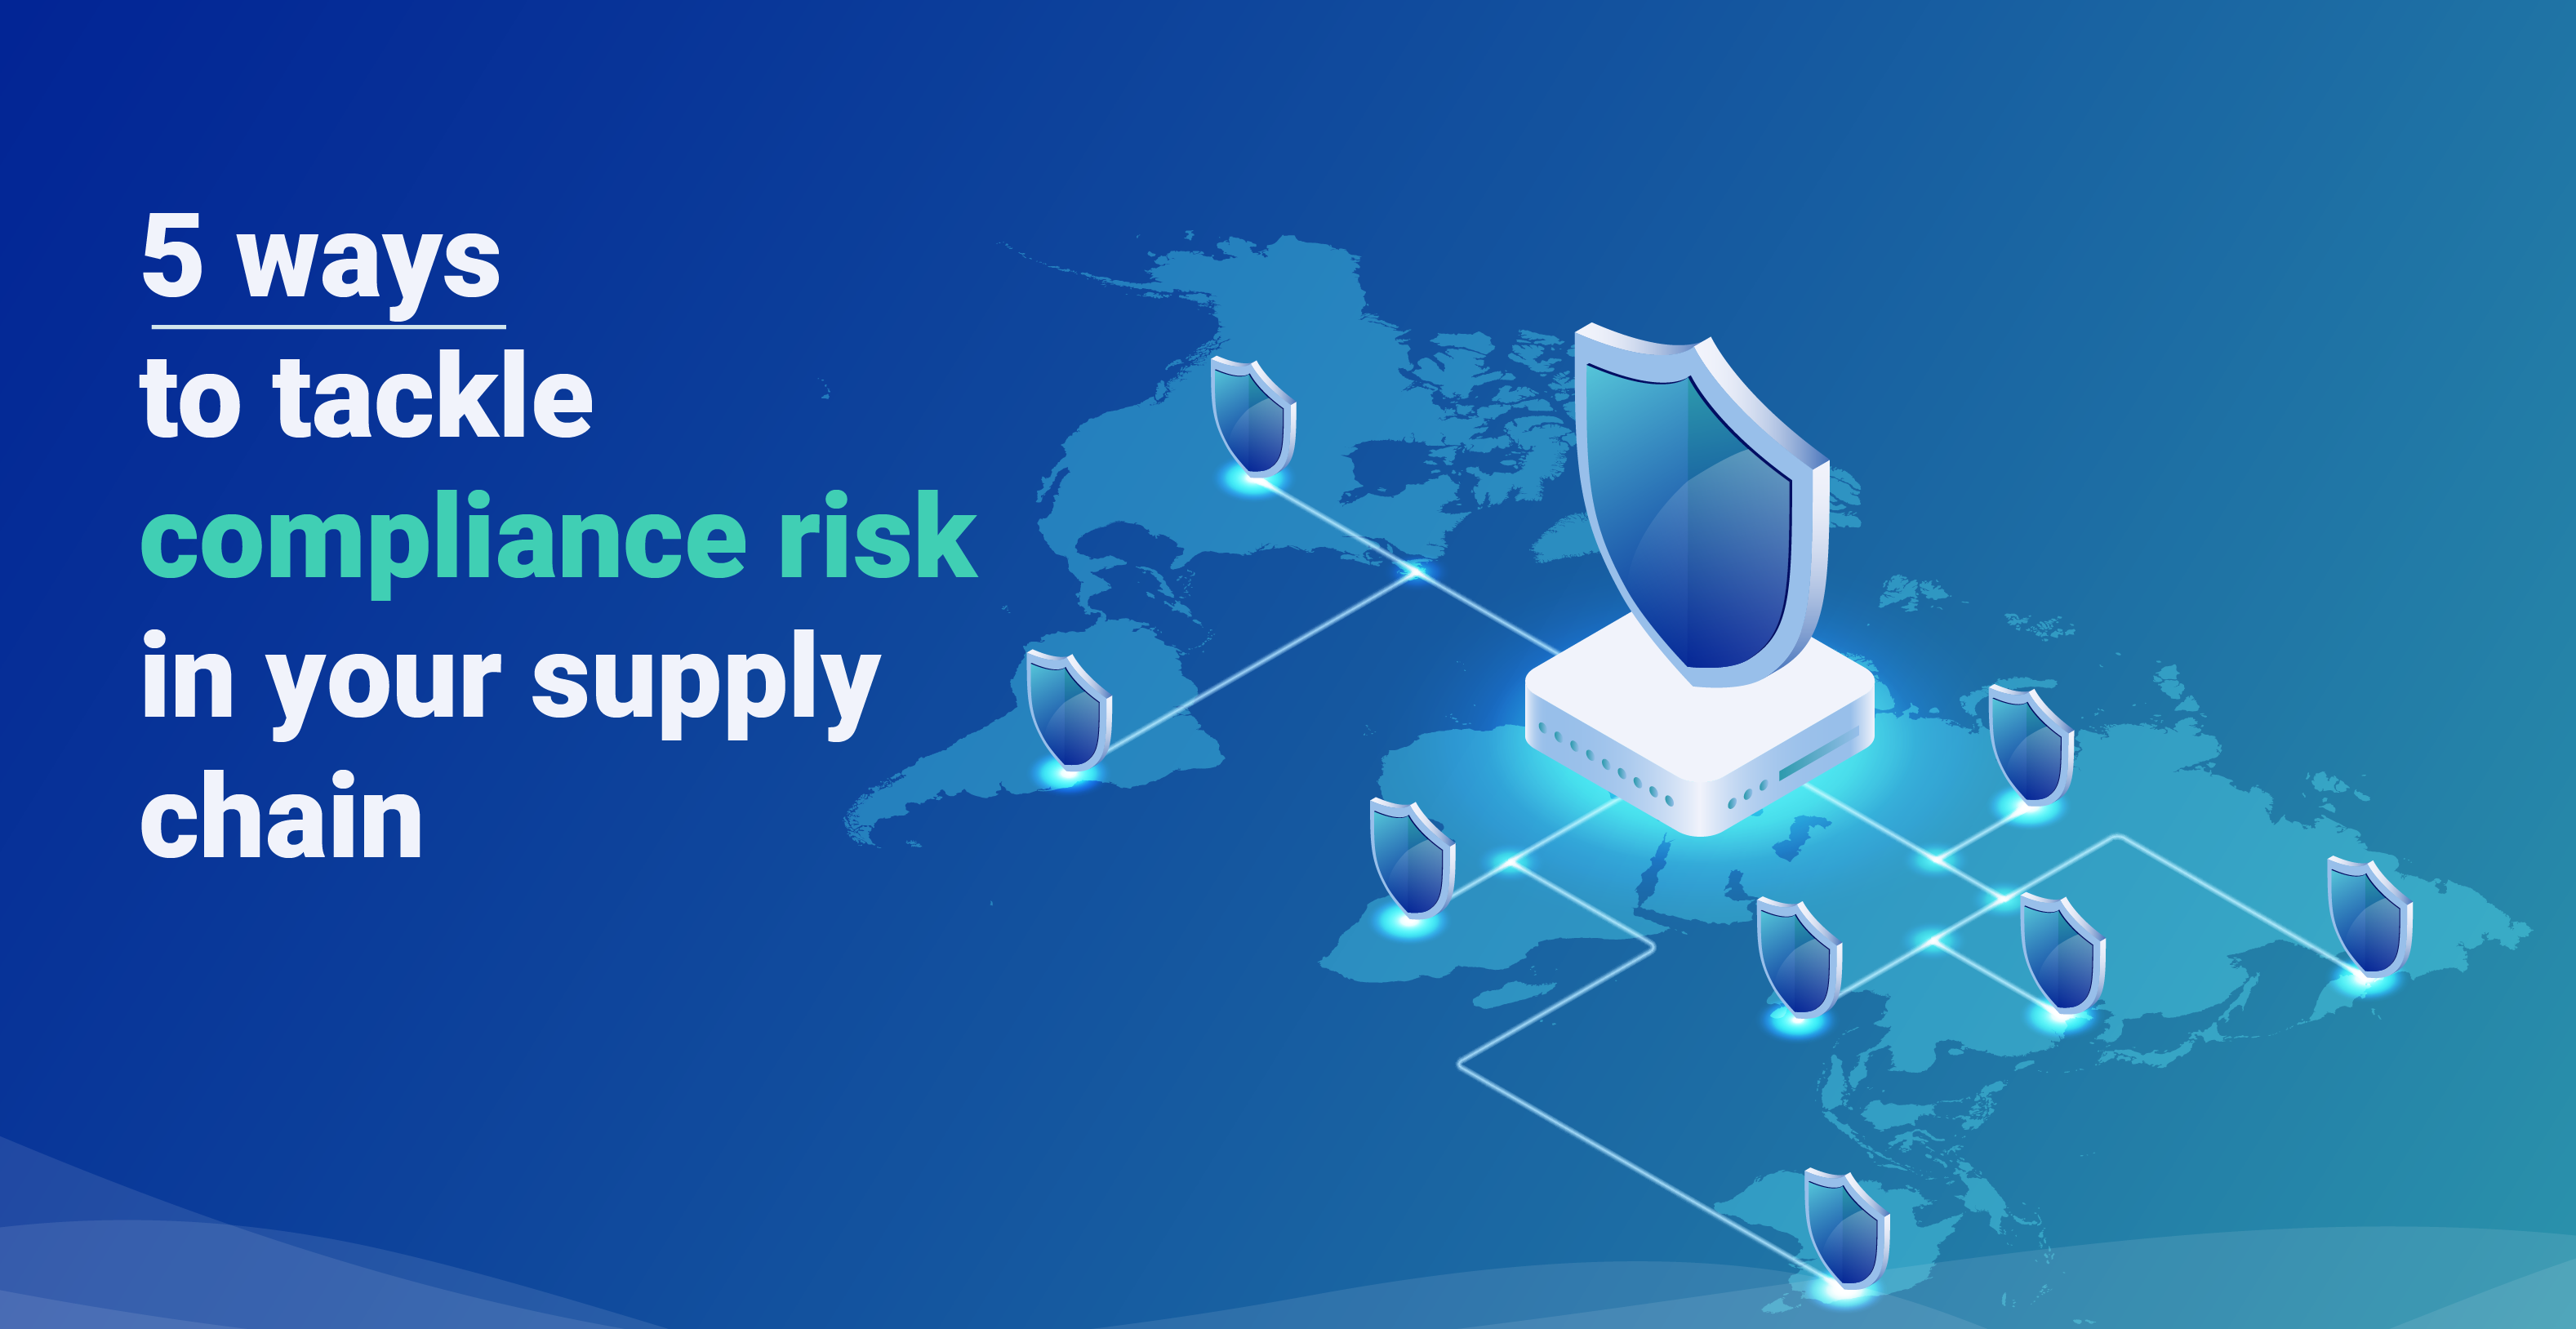 5 ways you can tackle compliance risk in your supply chain